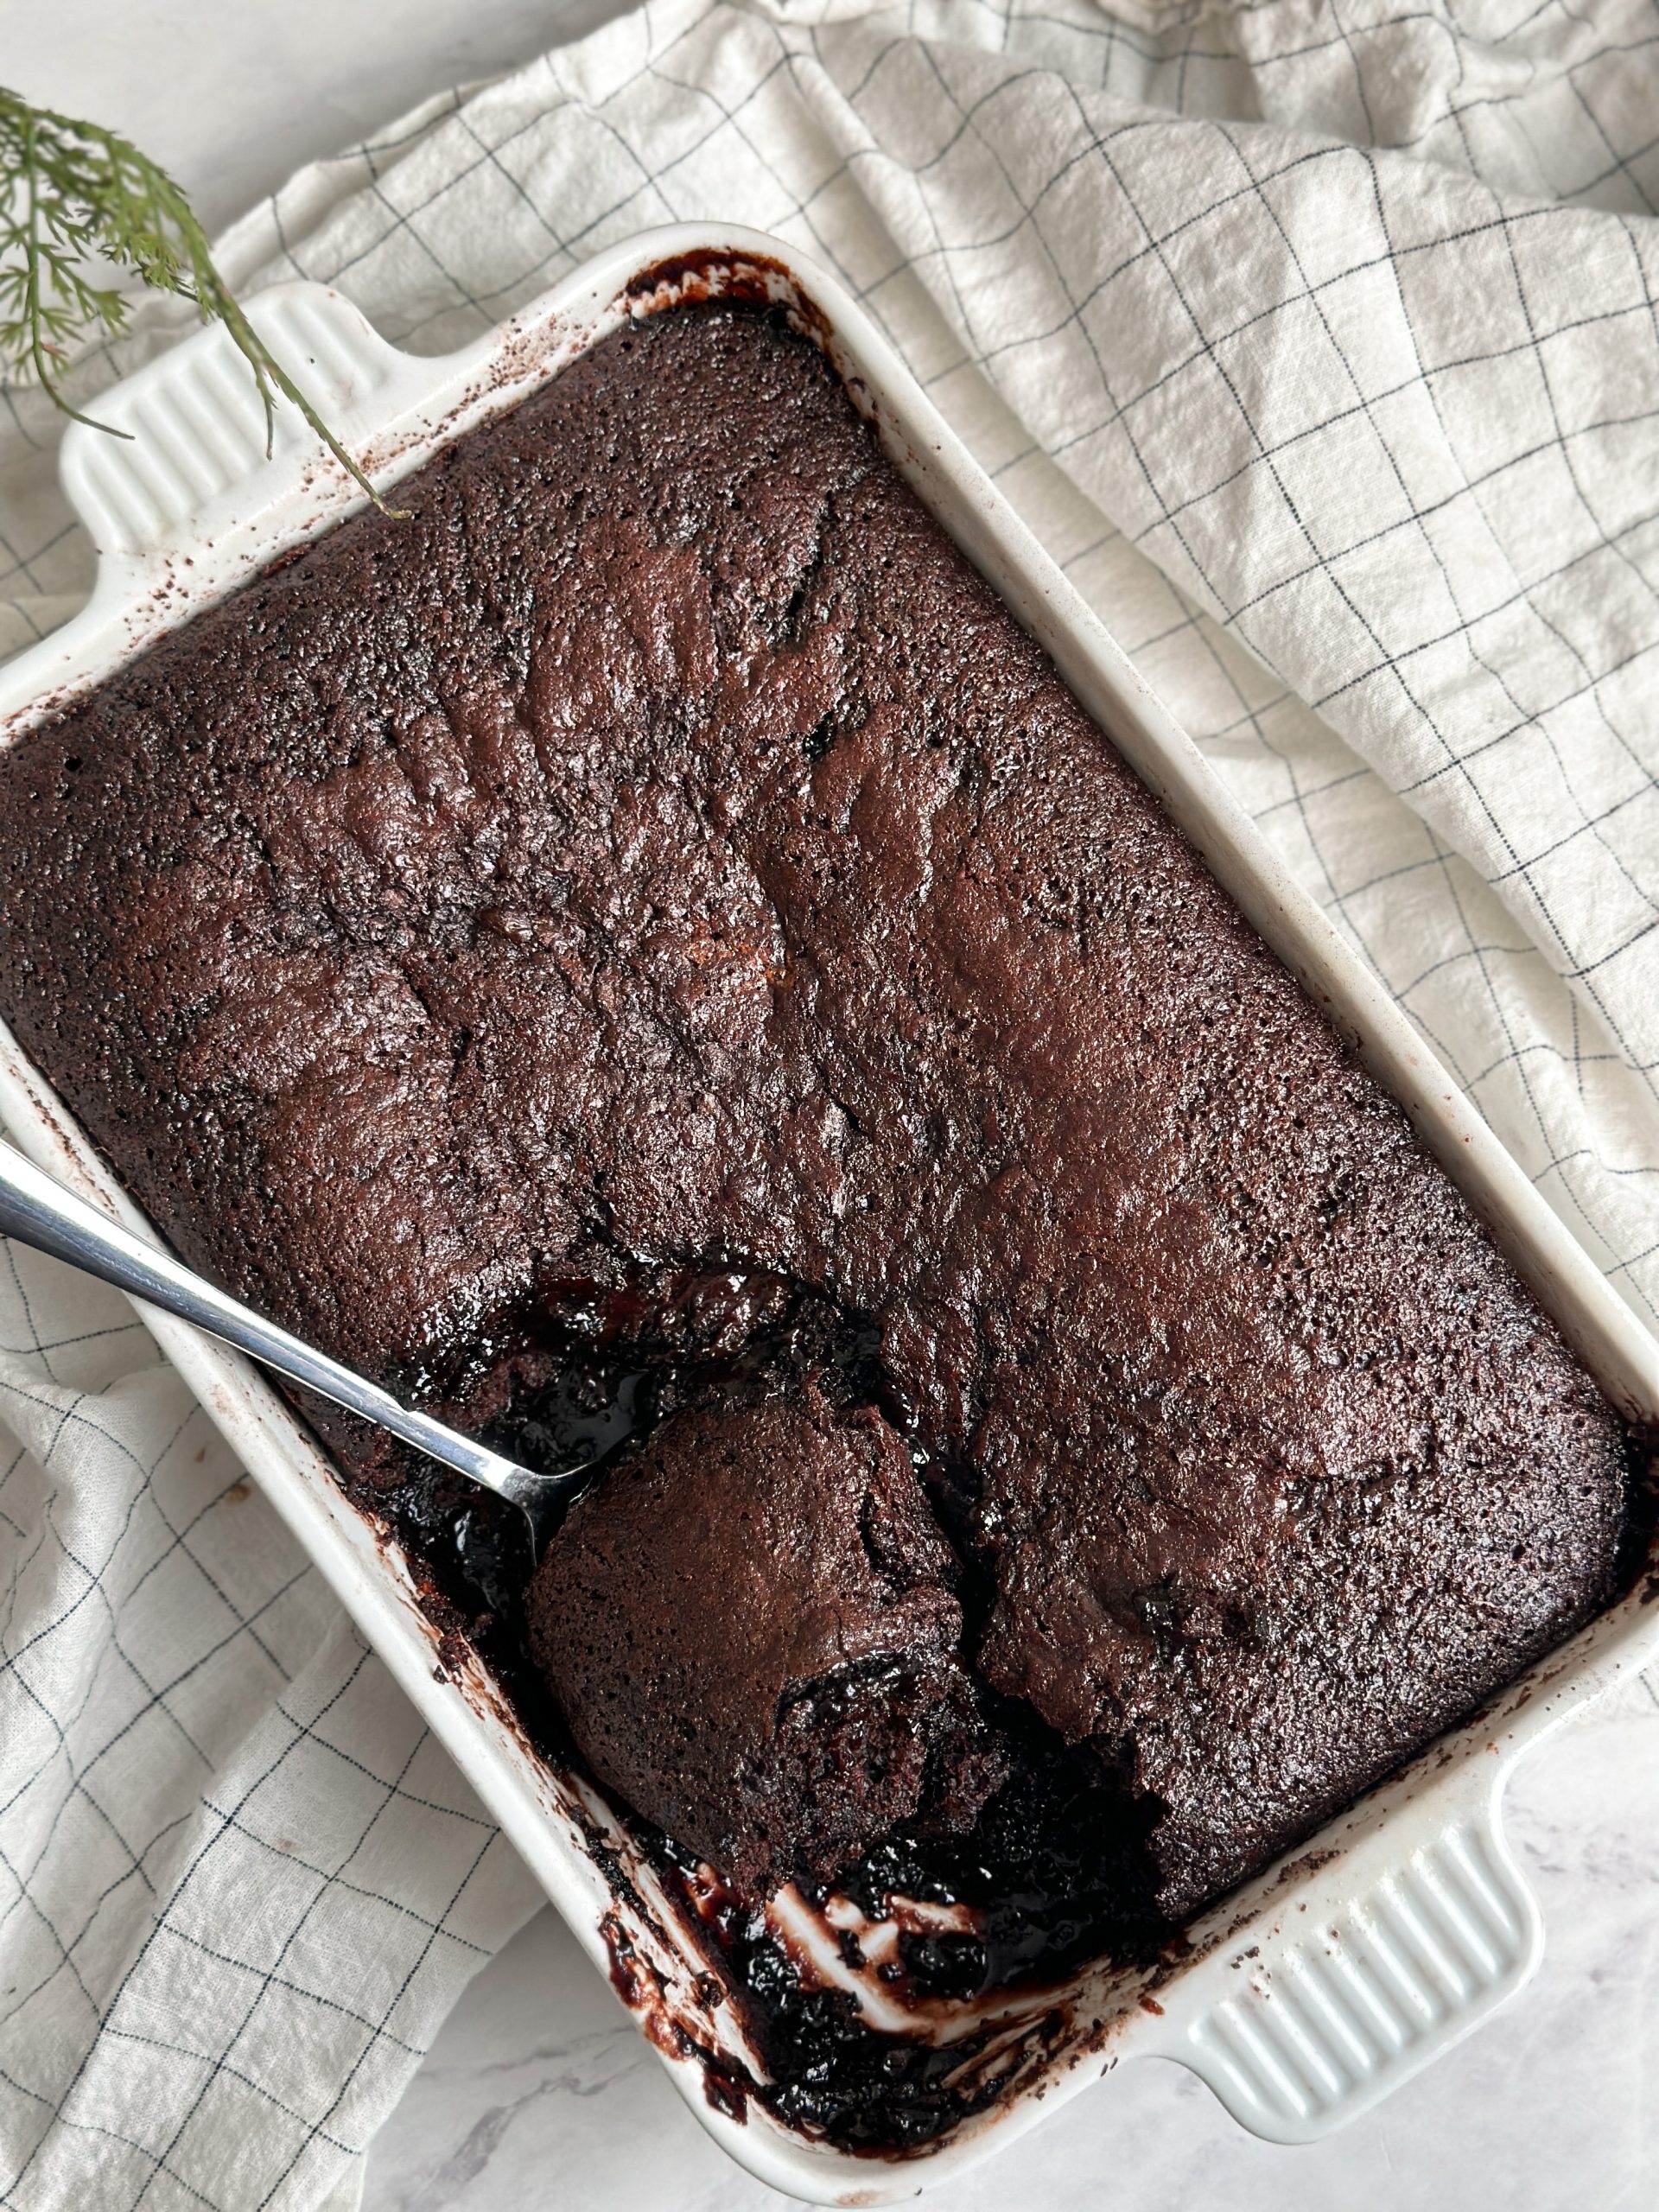 hot fudge chocolate cake in a ceramic dish with a spoon pulling out a serving revealing a layer of hot fudge underneath the chocolate cake, pic from the top